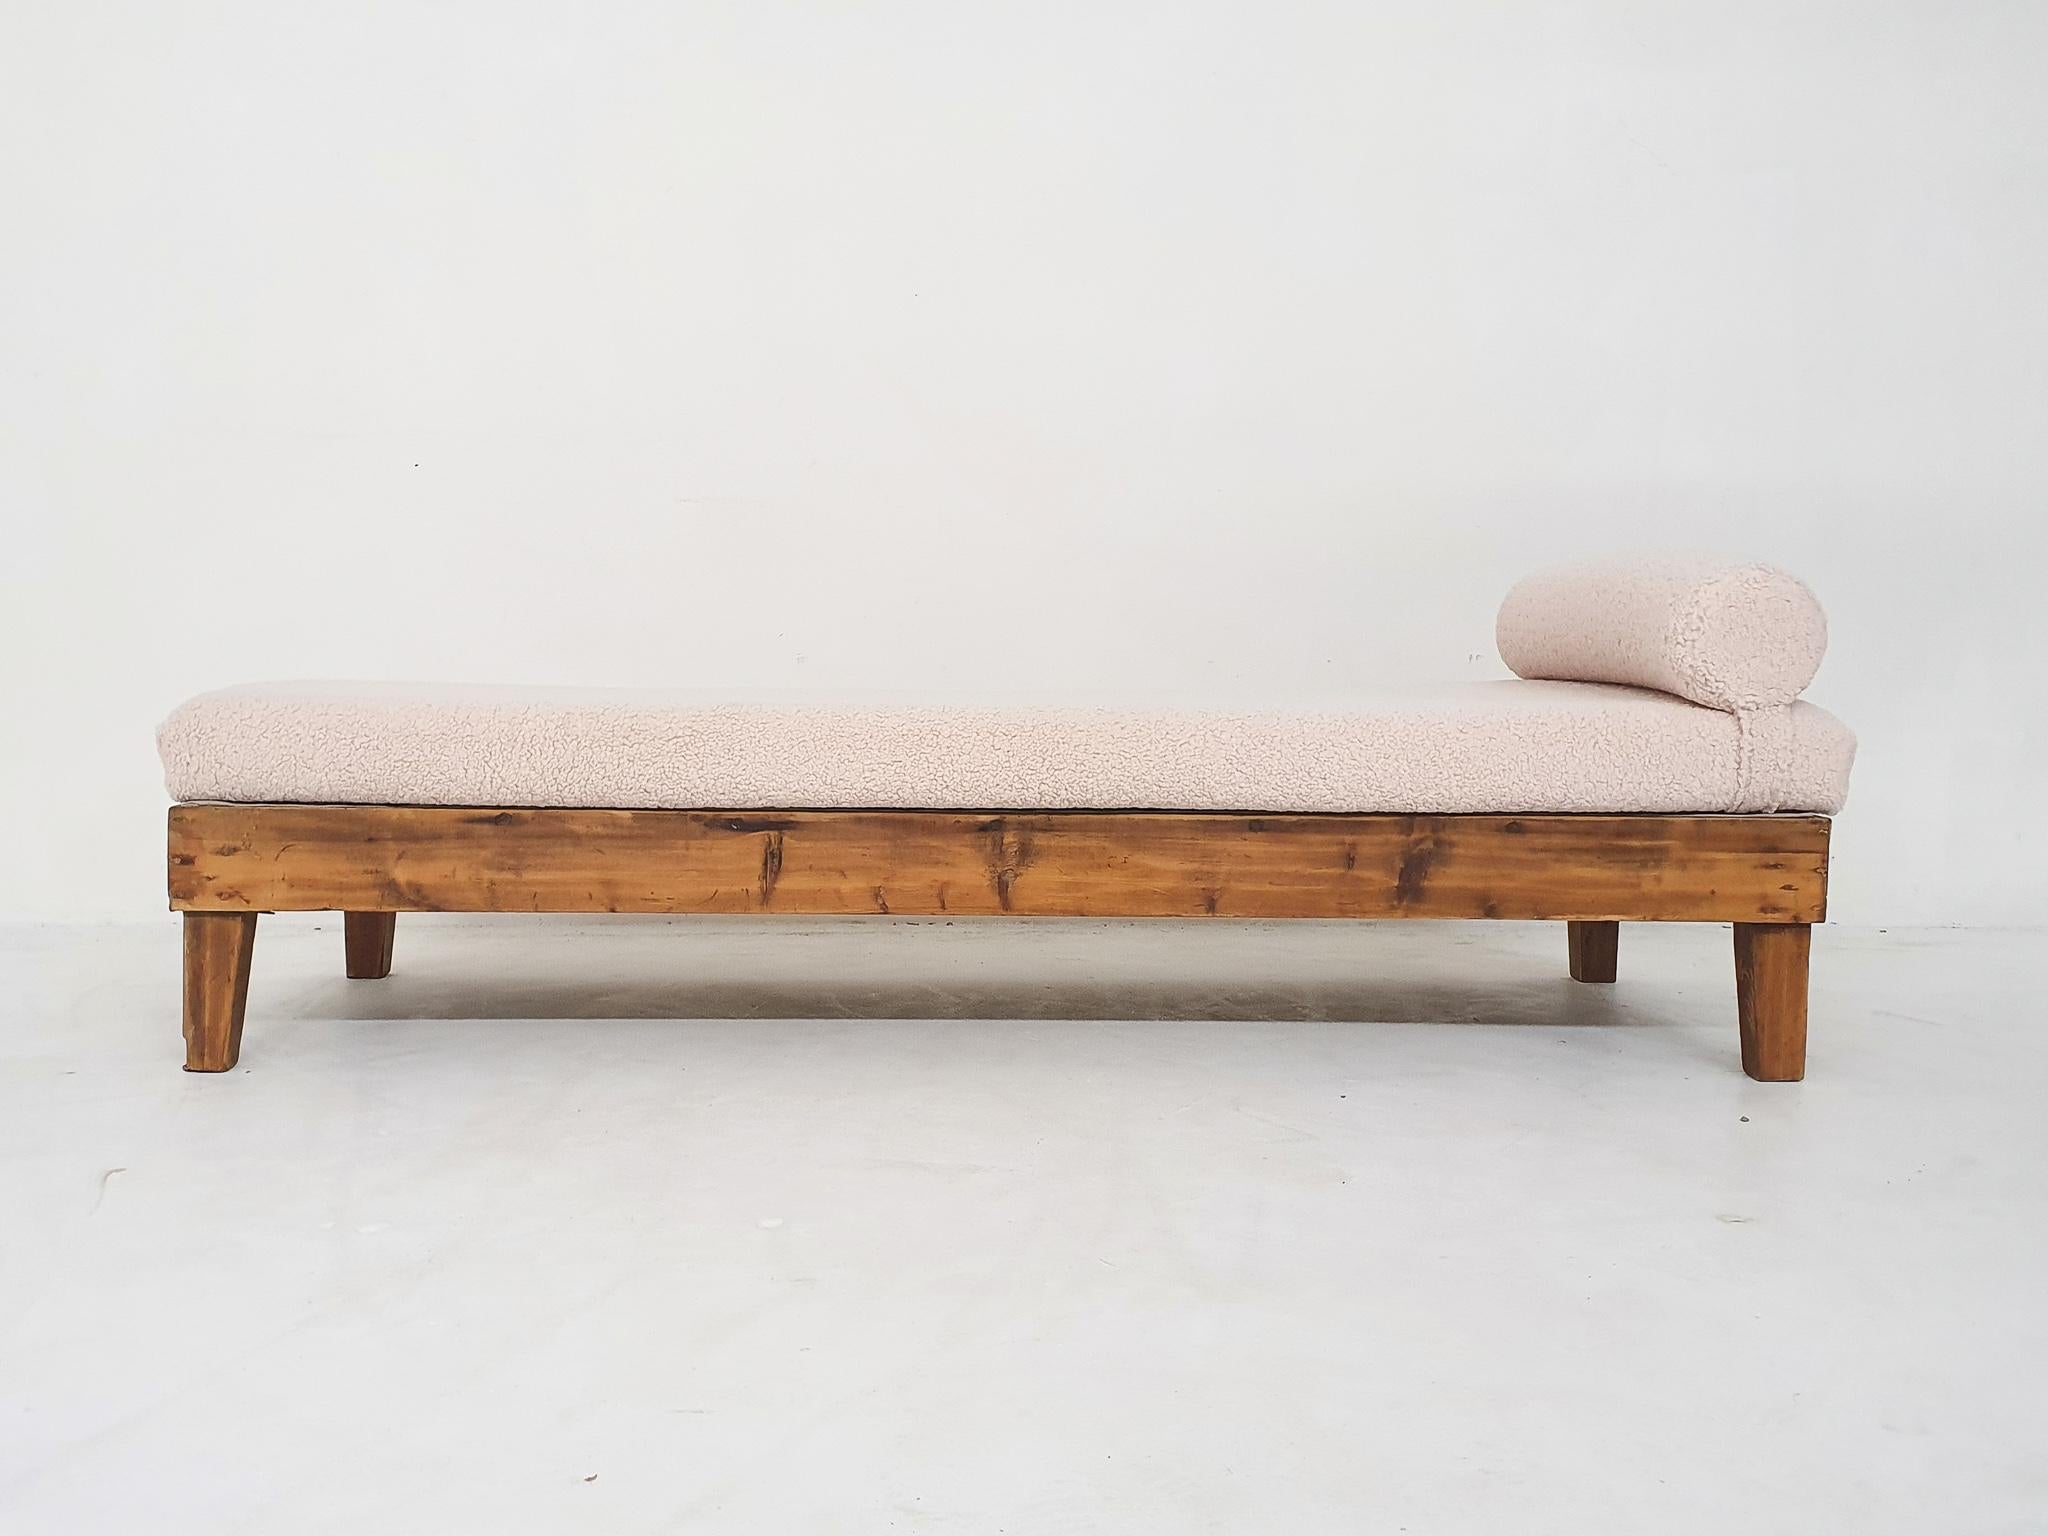 Bohemian Dutch Wooden Daybed with Teddy Upholstery, 1940's